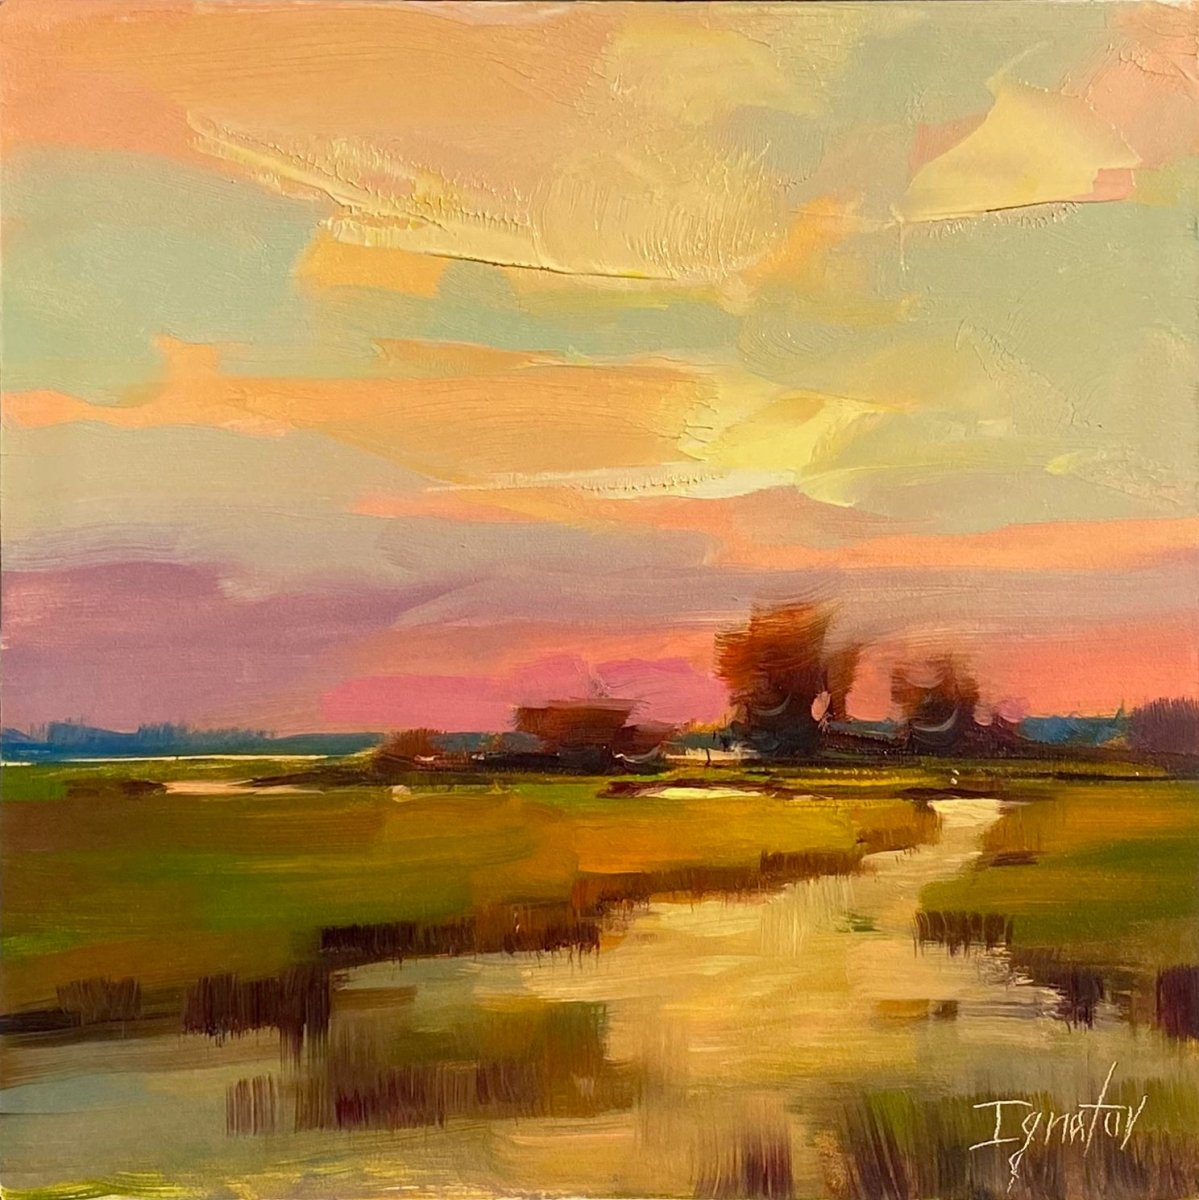 Lowcountry Marsh, Study by Ignat Ignatov at LePrince Galleries